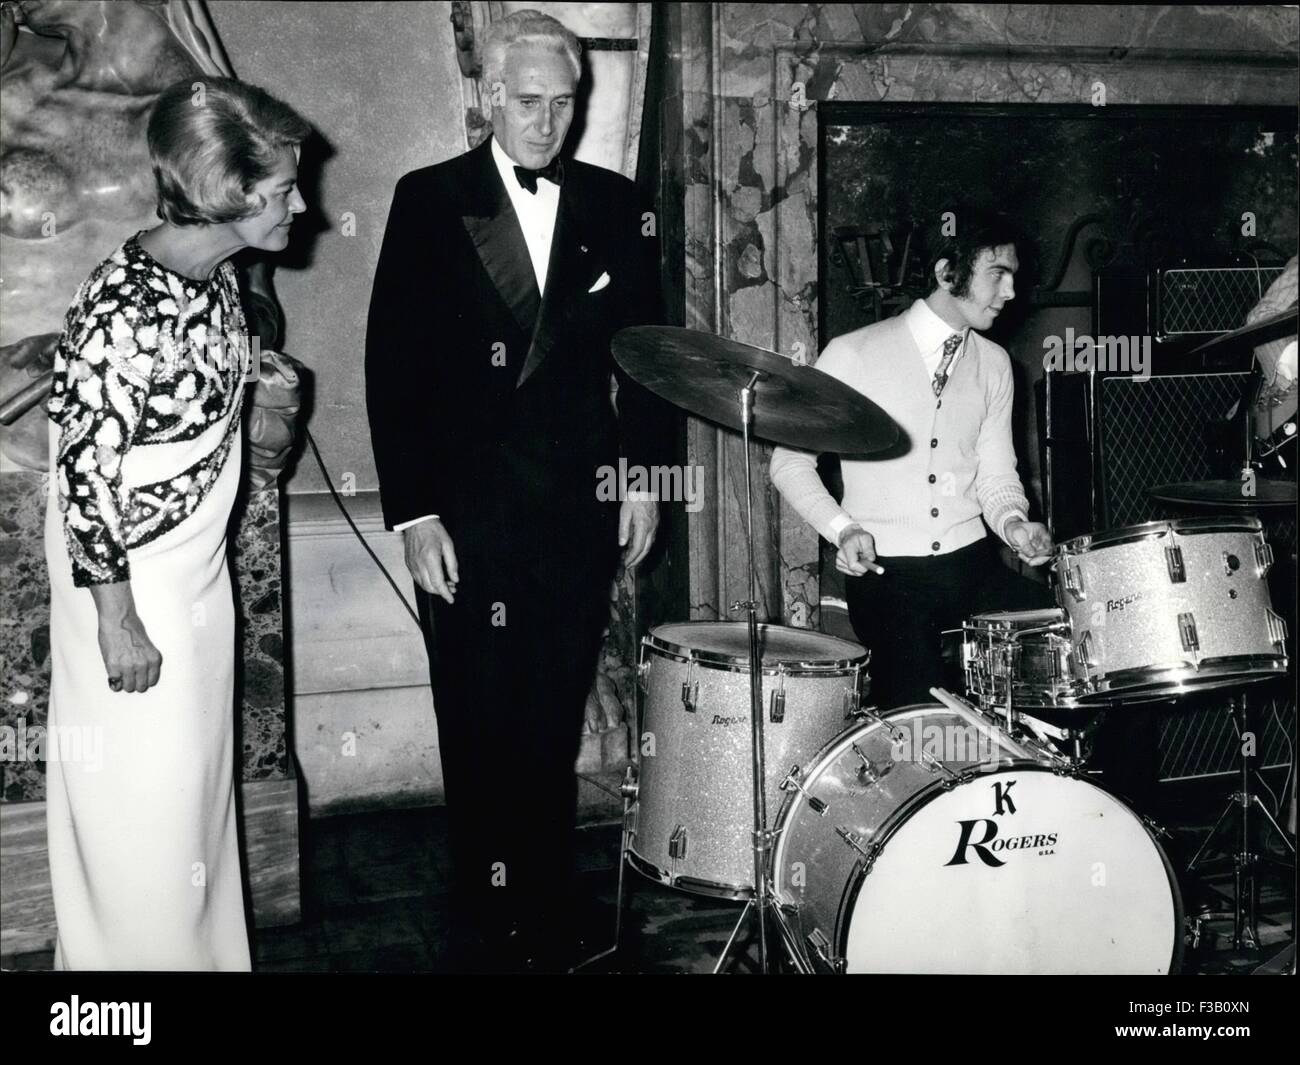 April 1967. 26th Dec, 1979. Pierre Cardin the famous Paris dress maker, presented his collection ''Spring 1967'' to the French Embassy in Rome. Palazzo Franese. Photo shows French ambassador Armand Berard controls the Orchestra. © Keystone Pictures USA/ZUMAPRESS.com/Alamy Live News Stock Photo